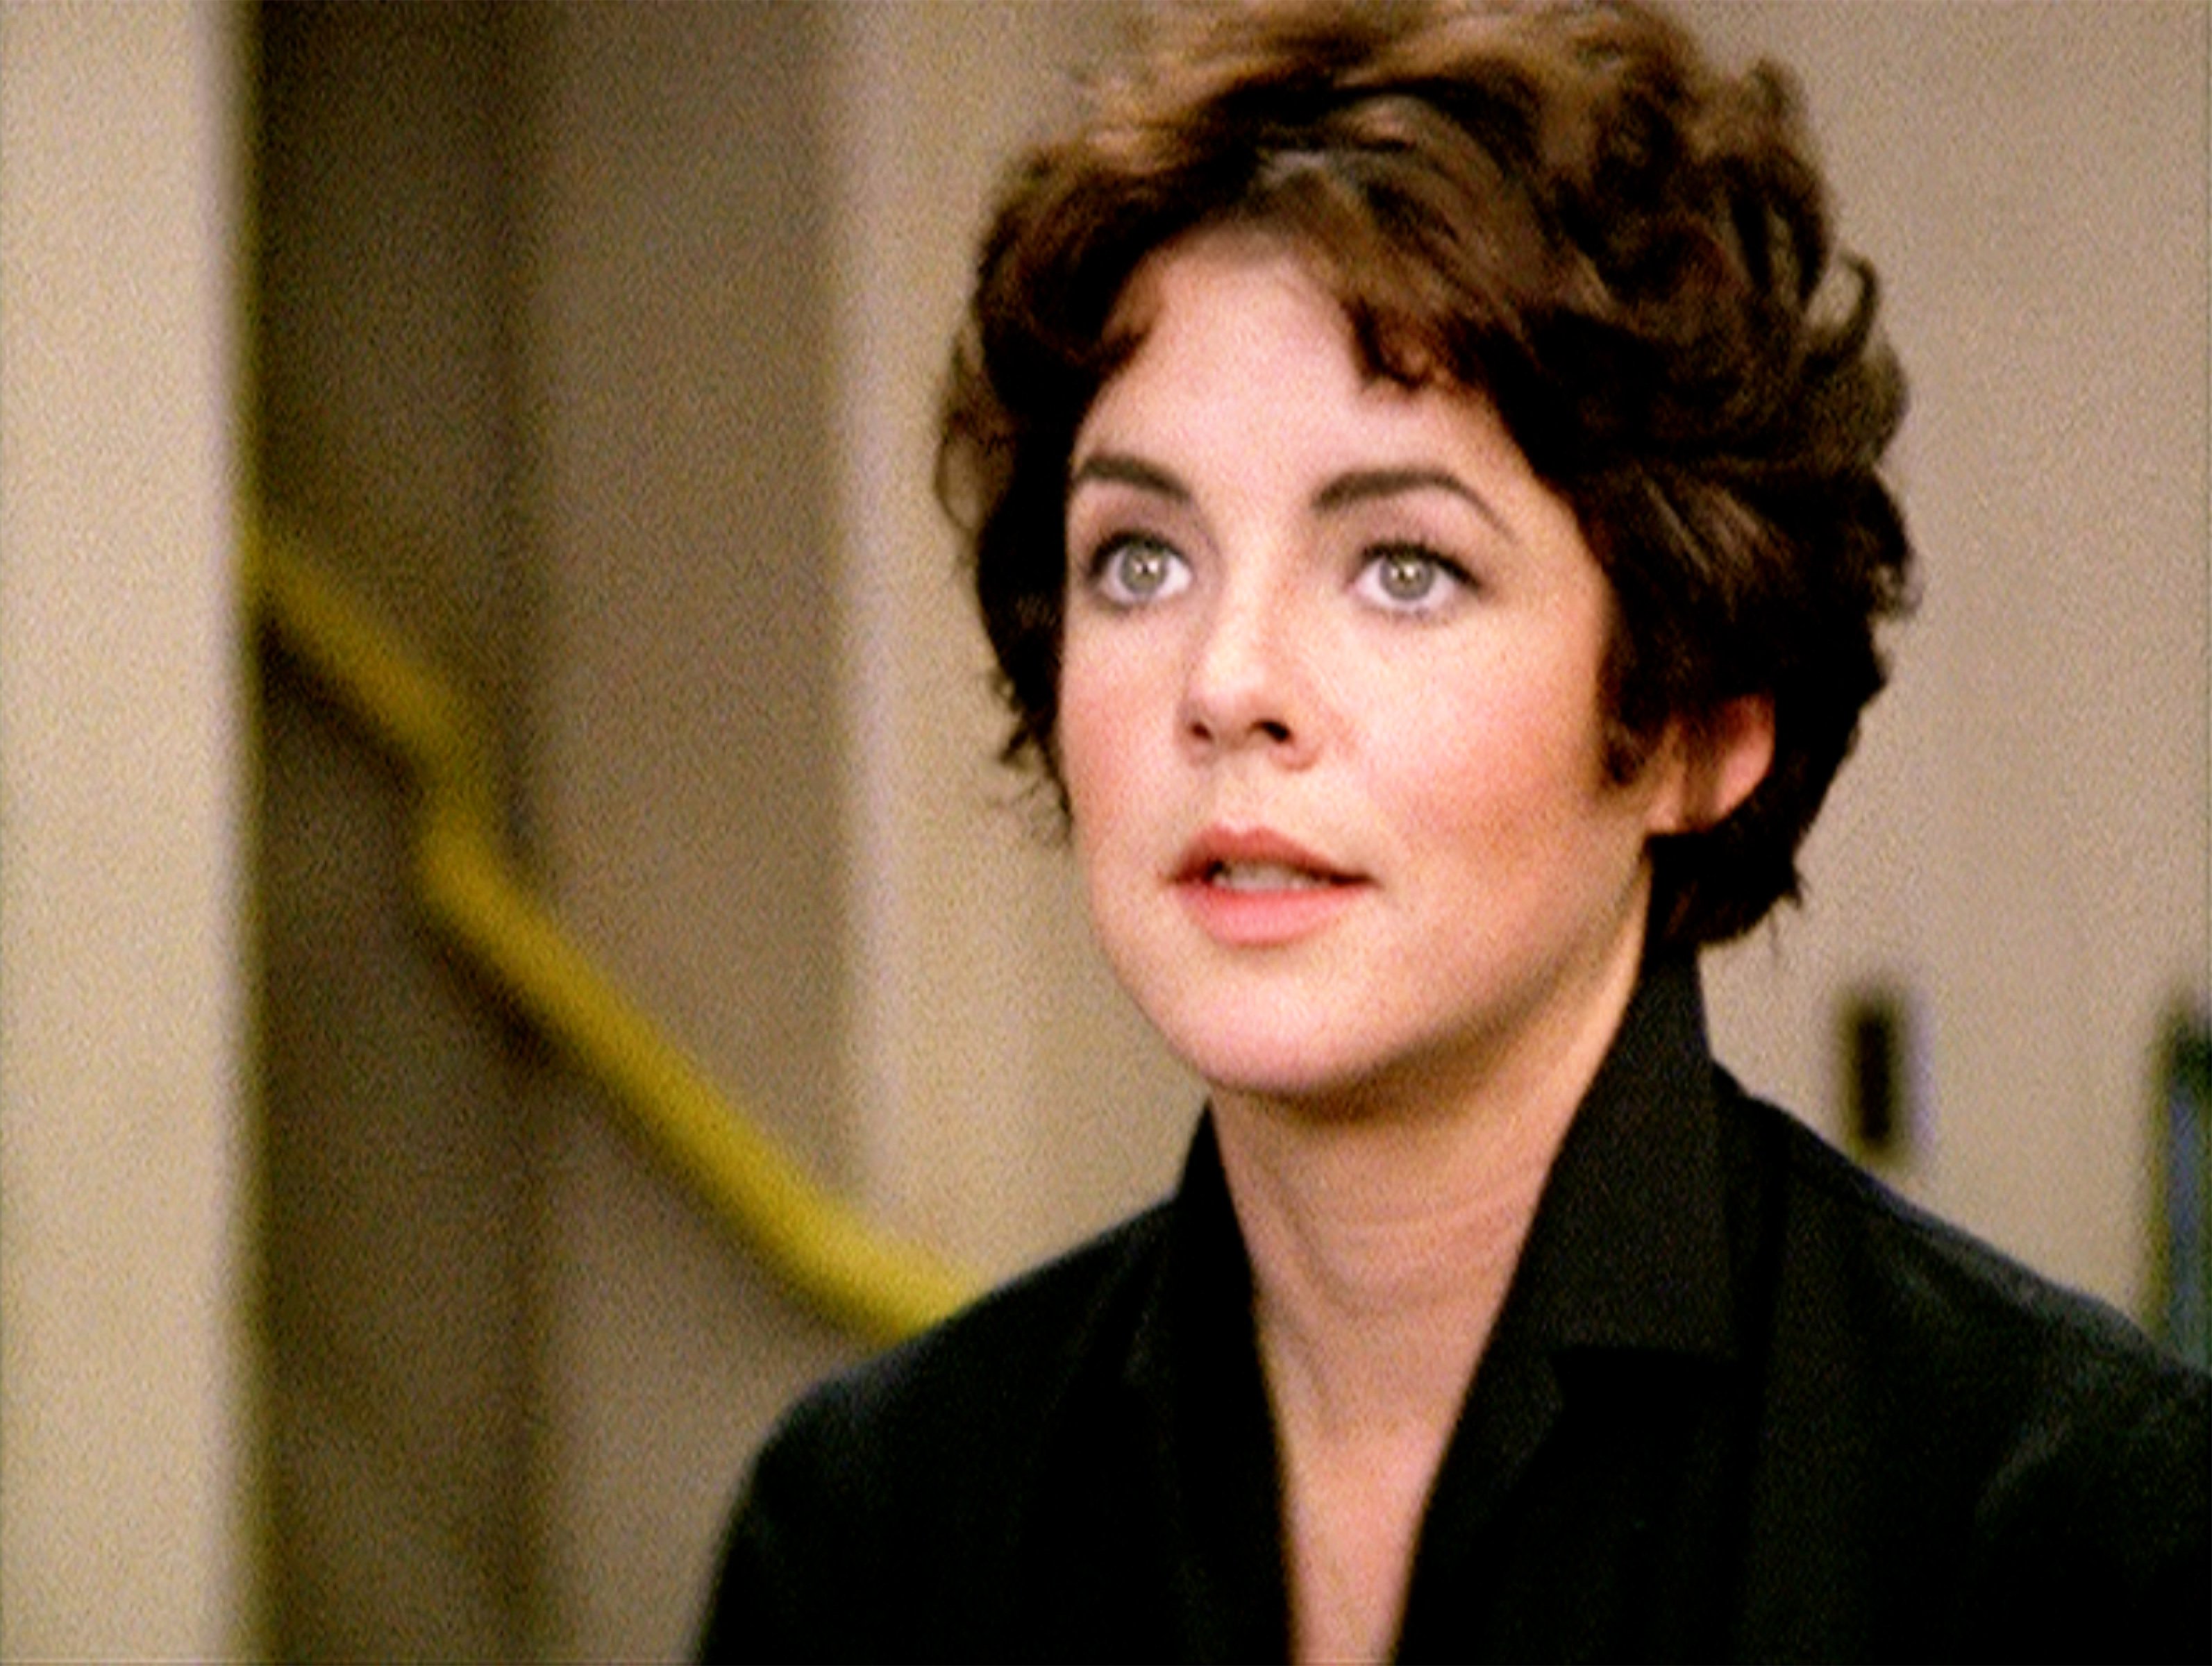 Stockard Channing in "Grease," June 16, 1978 | Source: Getty Images